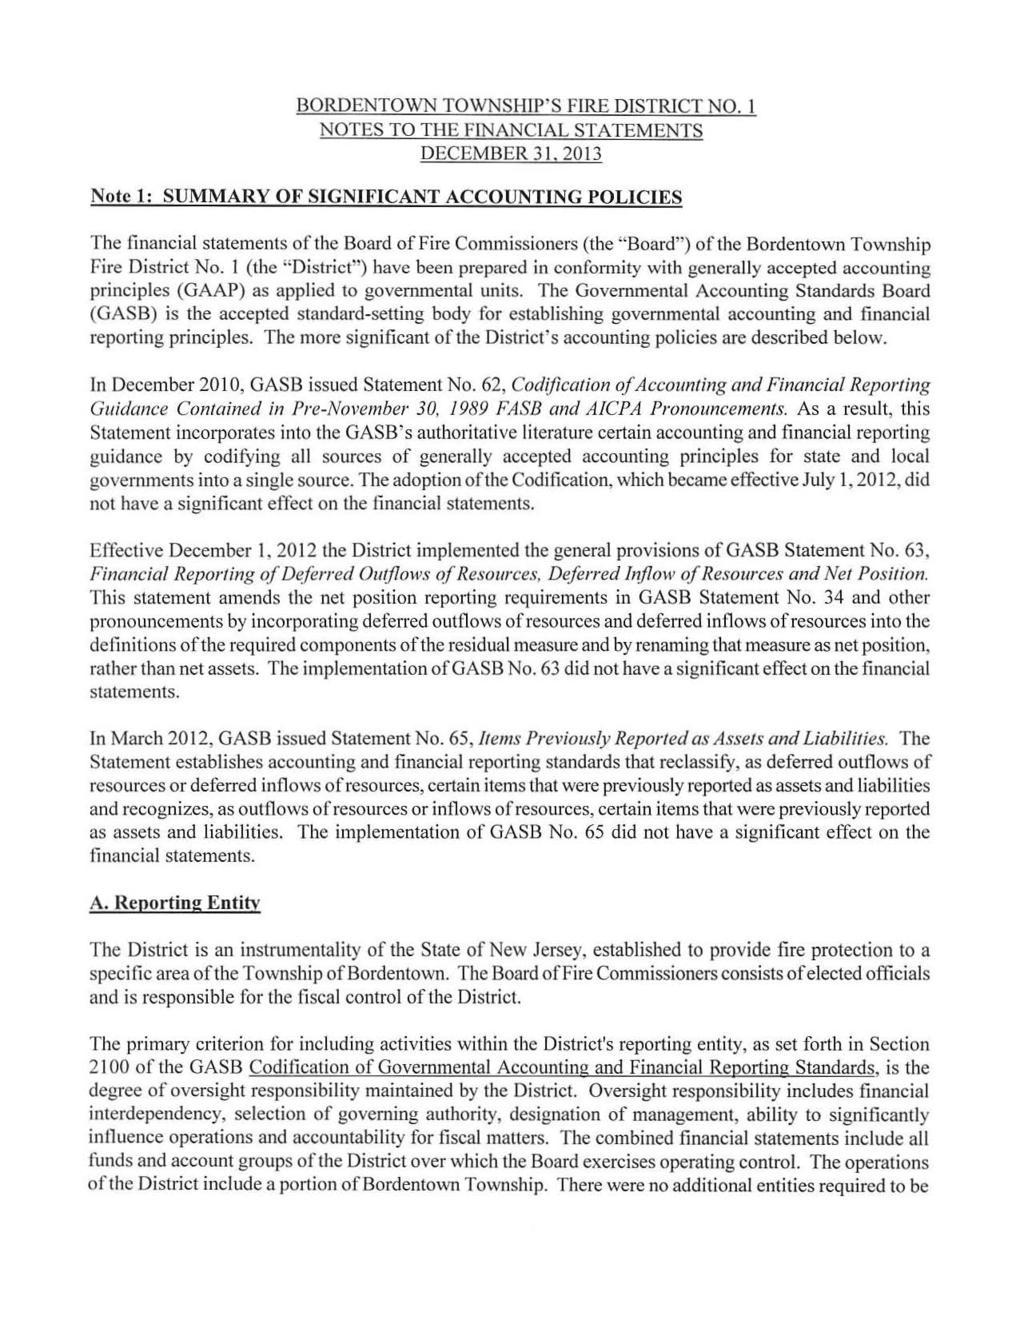 BORDENTOWN TOWNSHIP'S FIRE DISTRICT NO, I NOTES TO THE FINANCIAL STATEMENTS DECEM BER 3 1, 2013 Note I: SUMMARY OF SIGNIFICANT ACCOUNTING POLICIES The financial statements of the Board of Fire